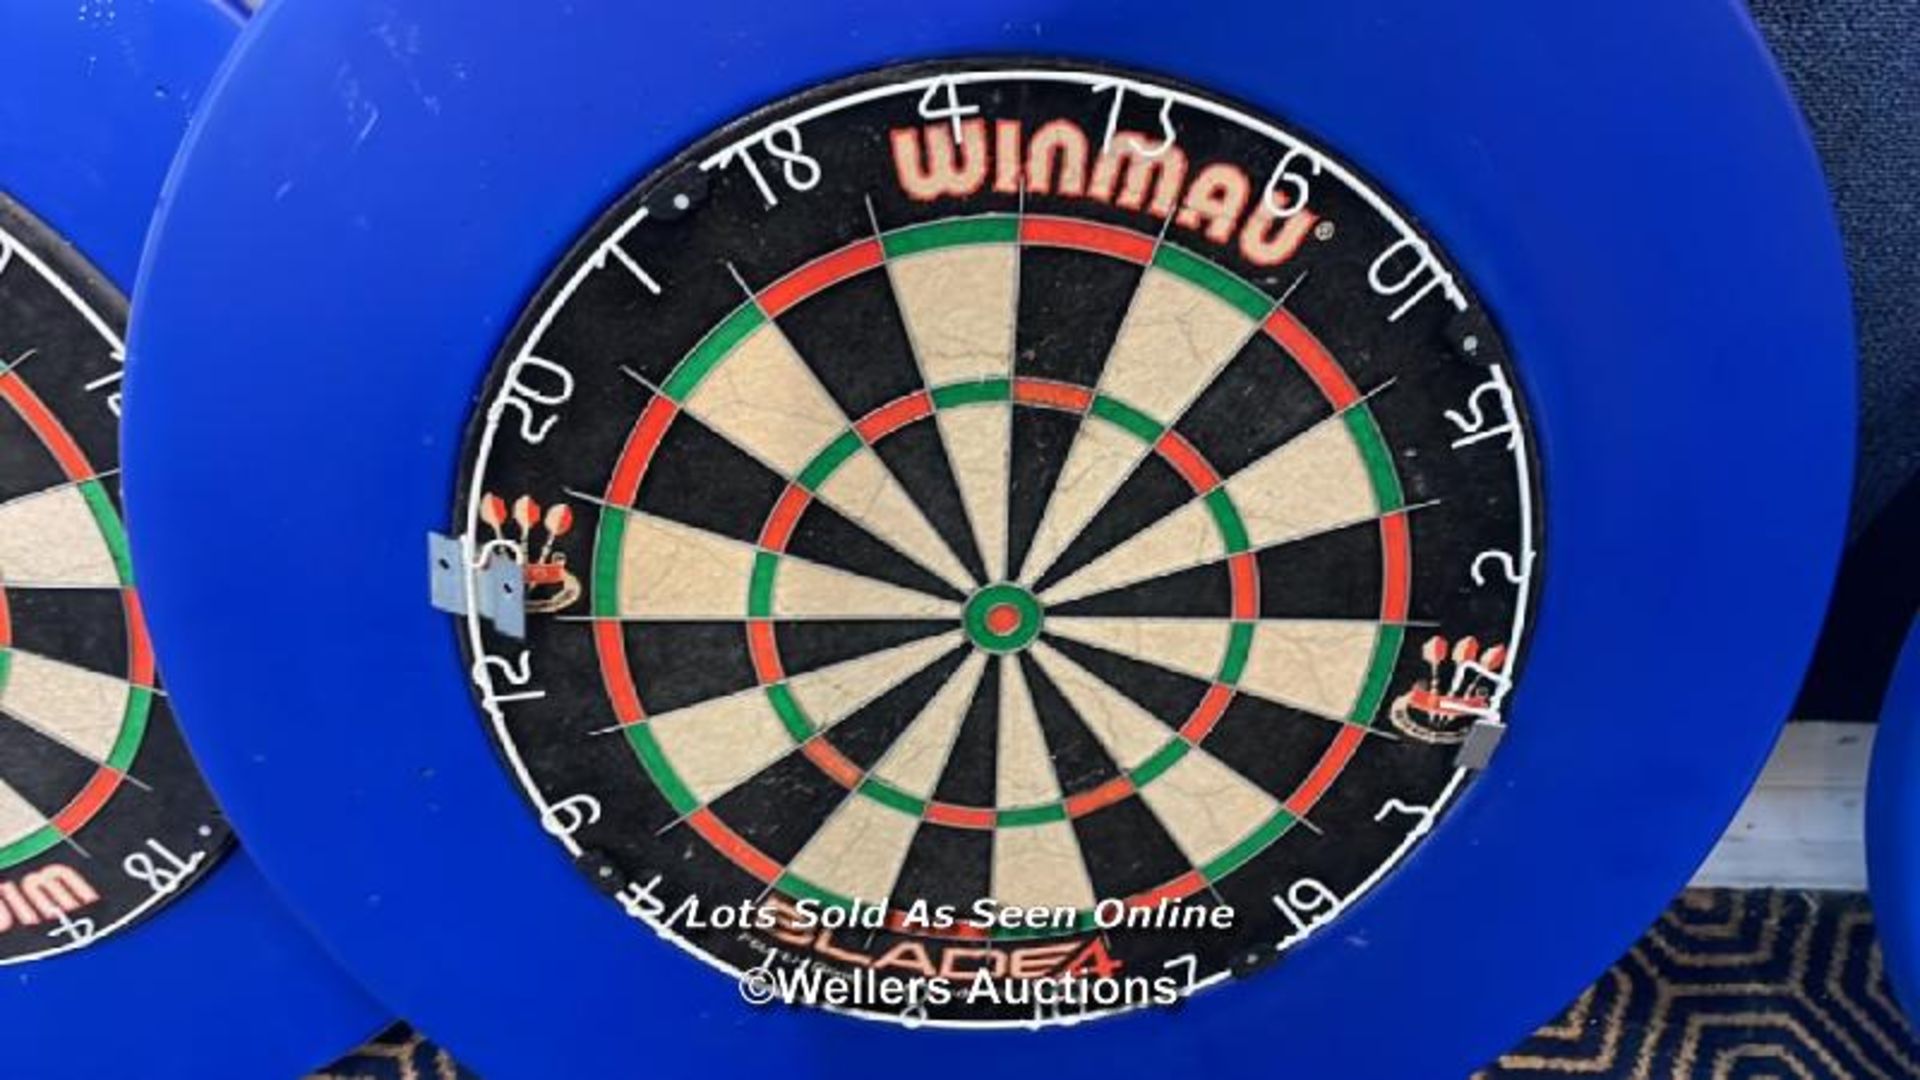 2X WINMAU BLADE 4 DART BOARDS WITH SURROUNDS / COLLECTION LOCATION: OLD WOKING DISTRICT - Image 3 of 3